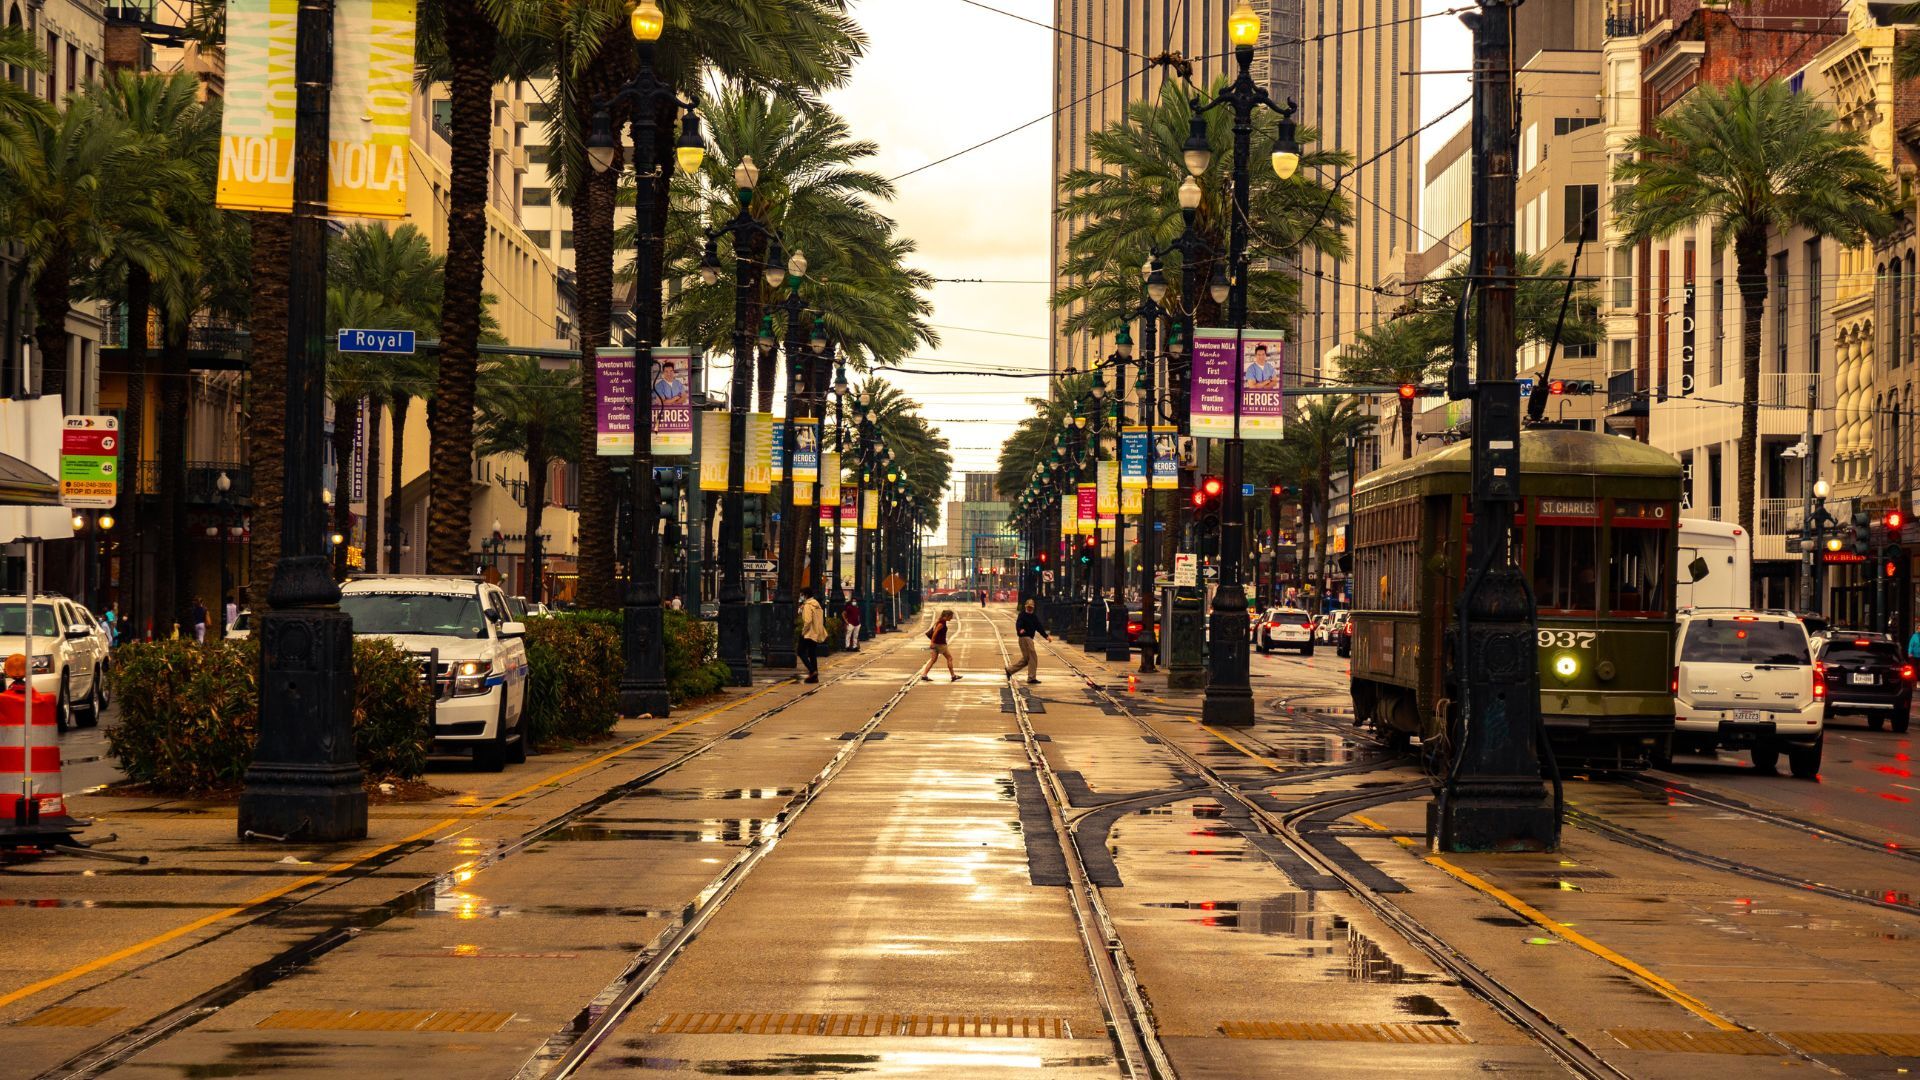 Canal Street in New Orleans, LA. - History By Mail